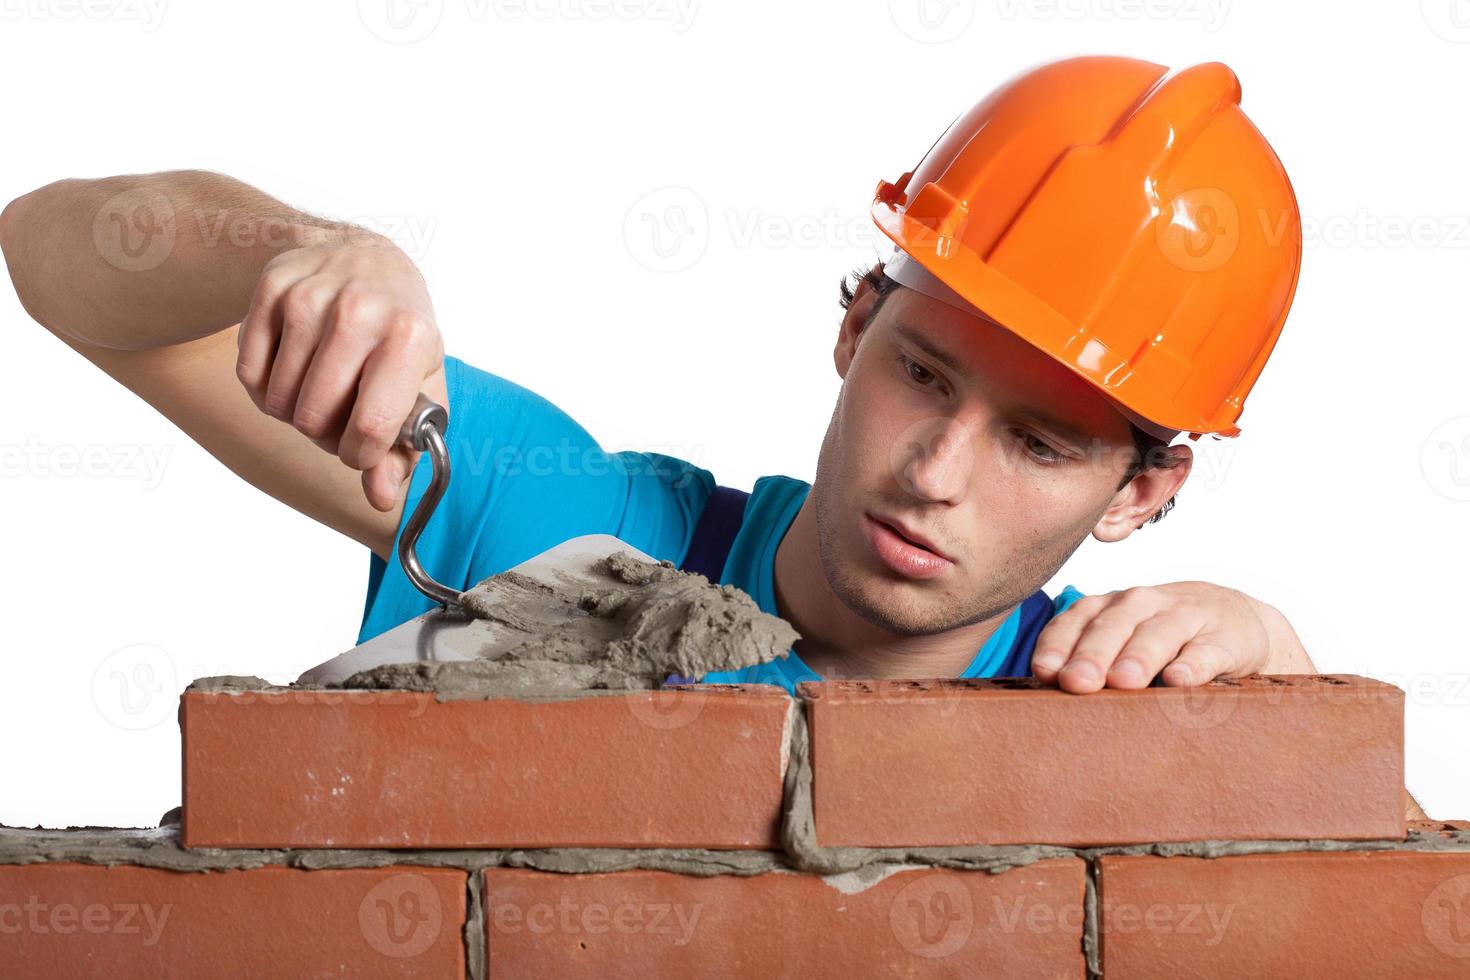 Concentrated bricklayer putting photo